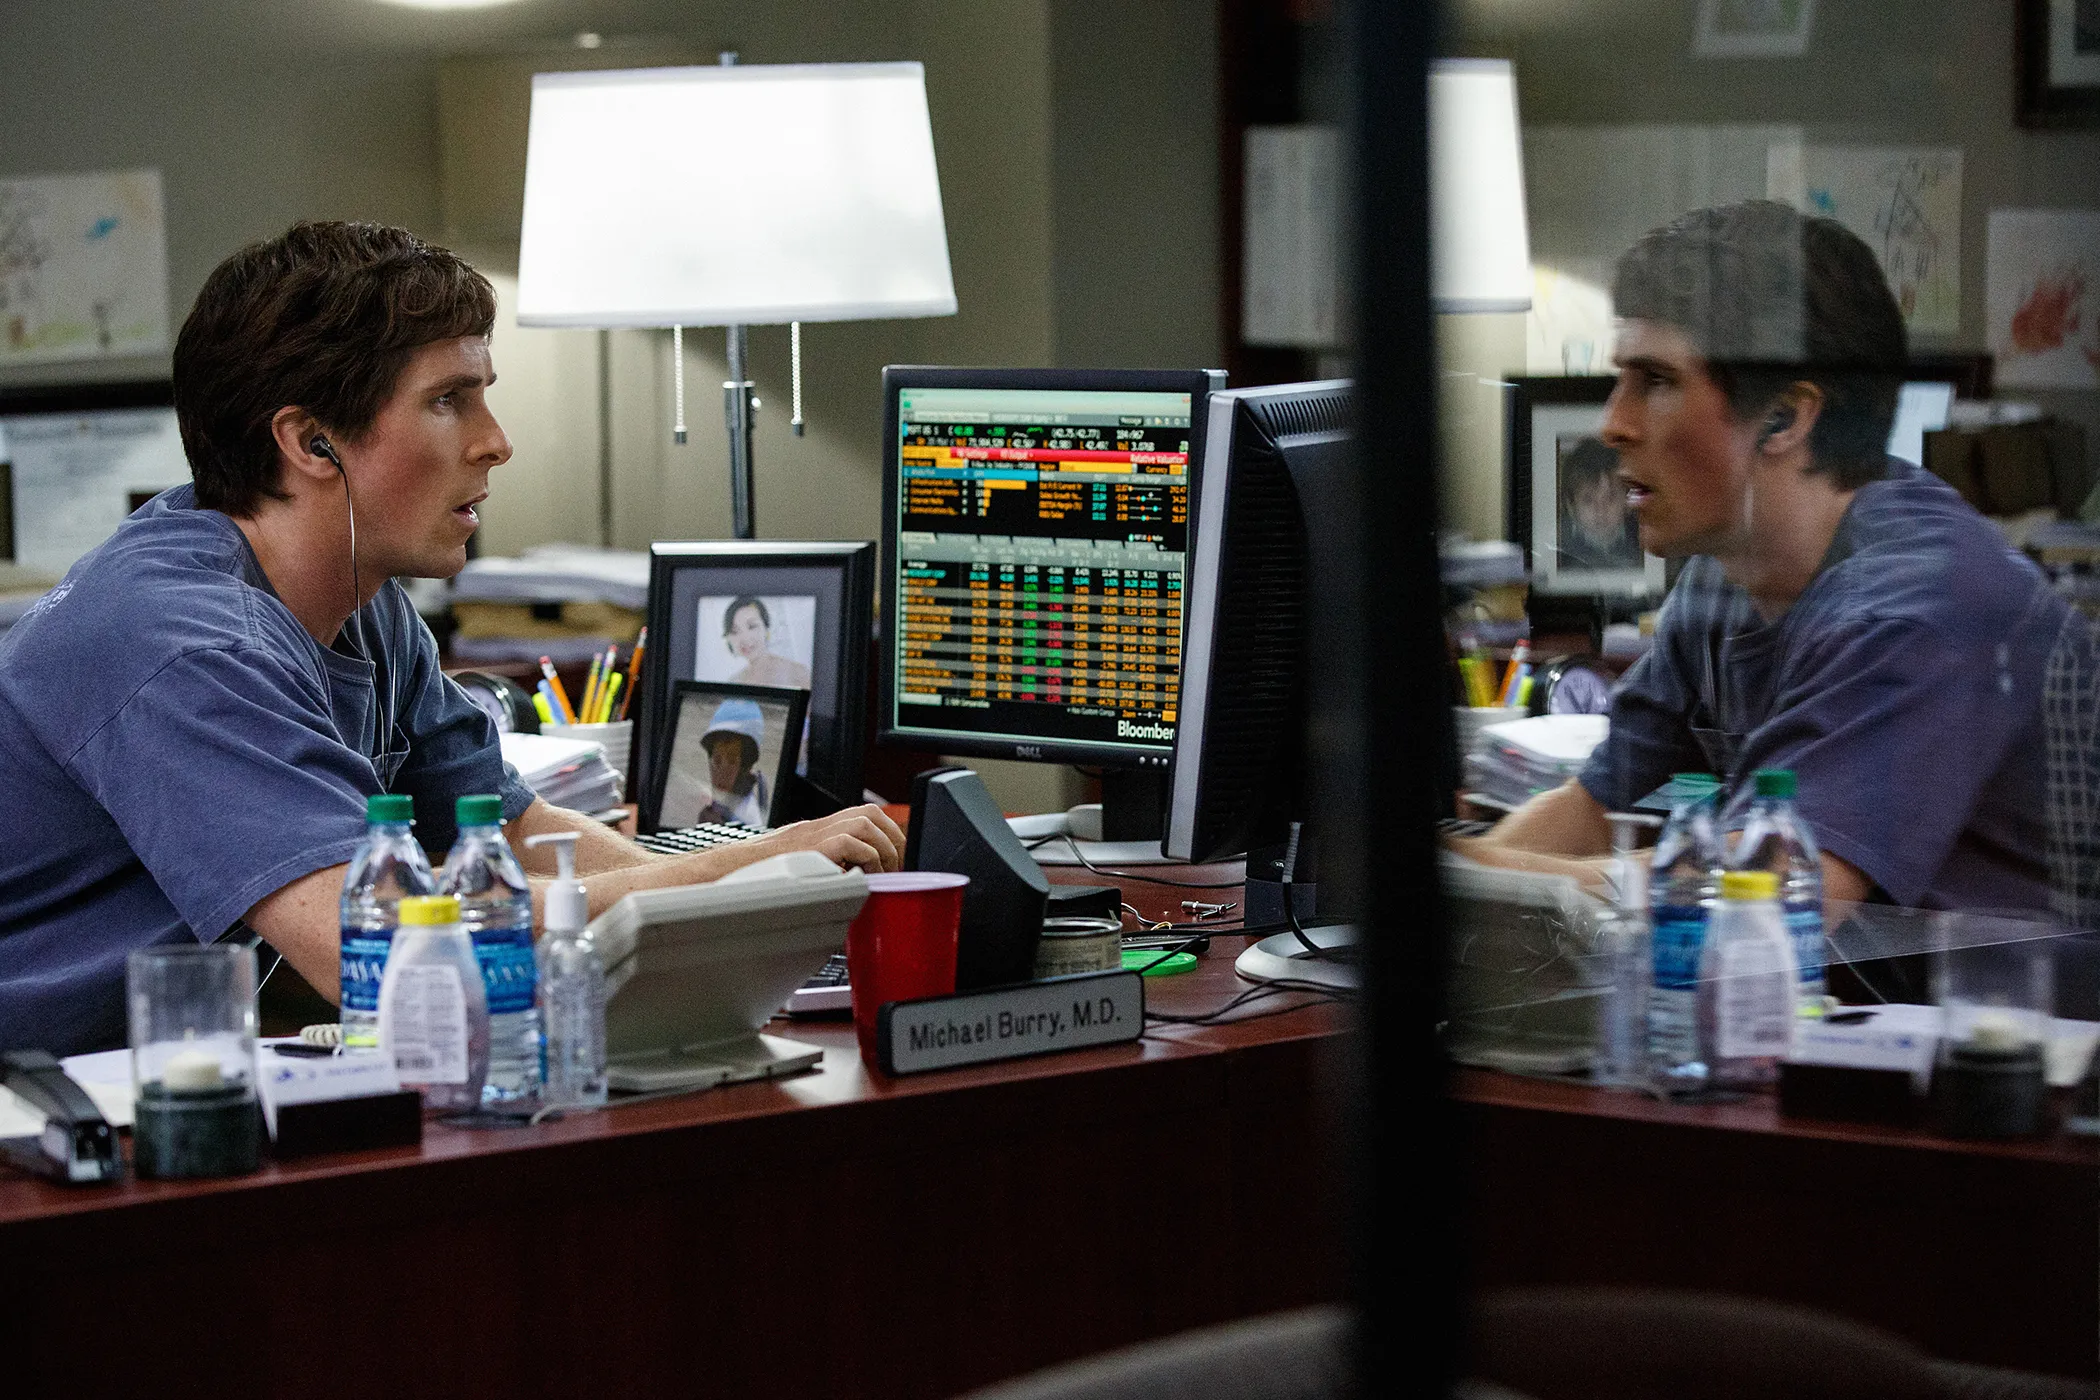 5 Things You Should Know Before You See "The Big Short"